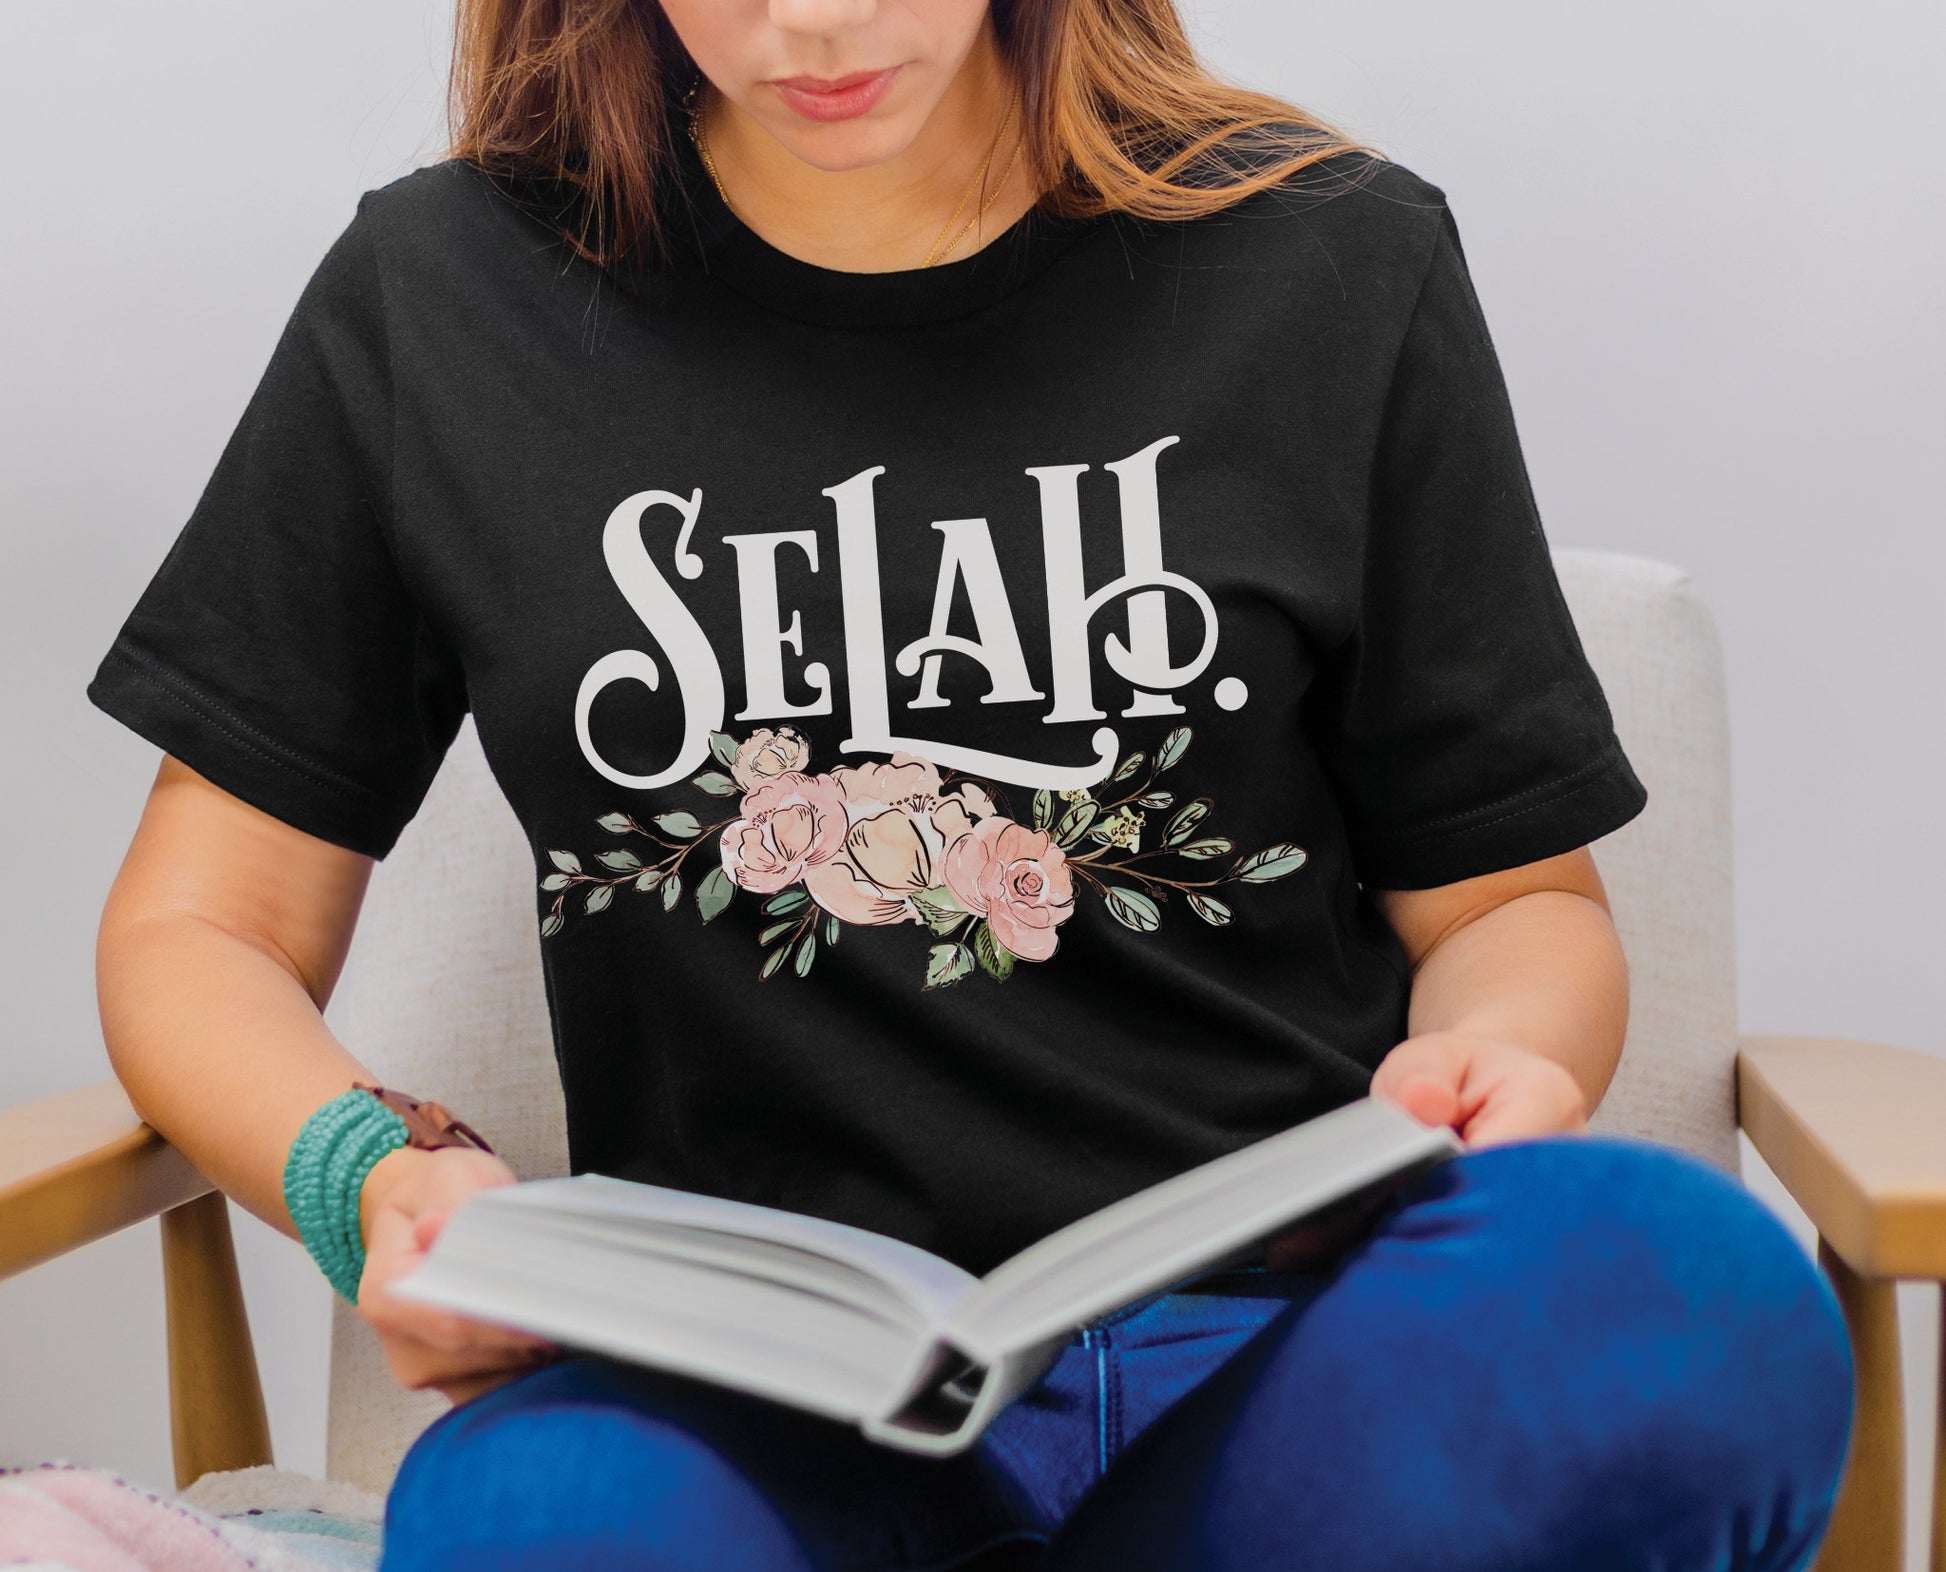 Selah Psalm bible verse watercolor floral Christian aesthetic design printed in white peach blush pink on soft black t-shirt for women